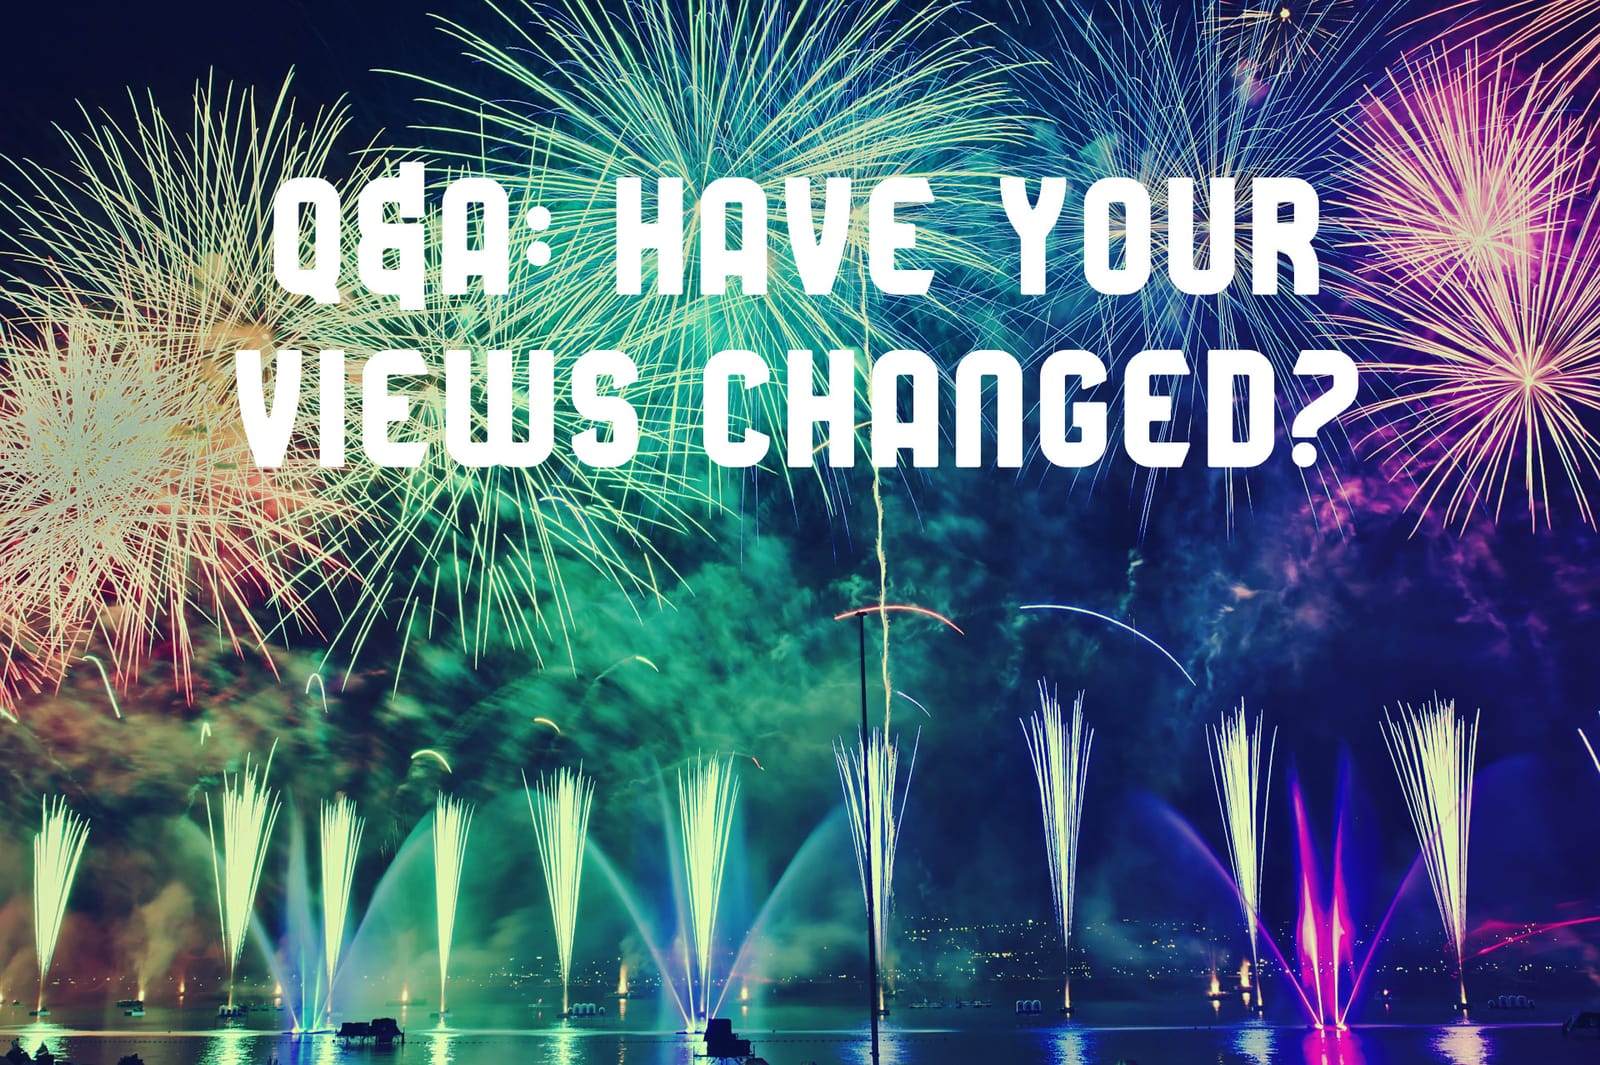 2020 Q&A: Have  Your Views Changed In Any Significant Ways?